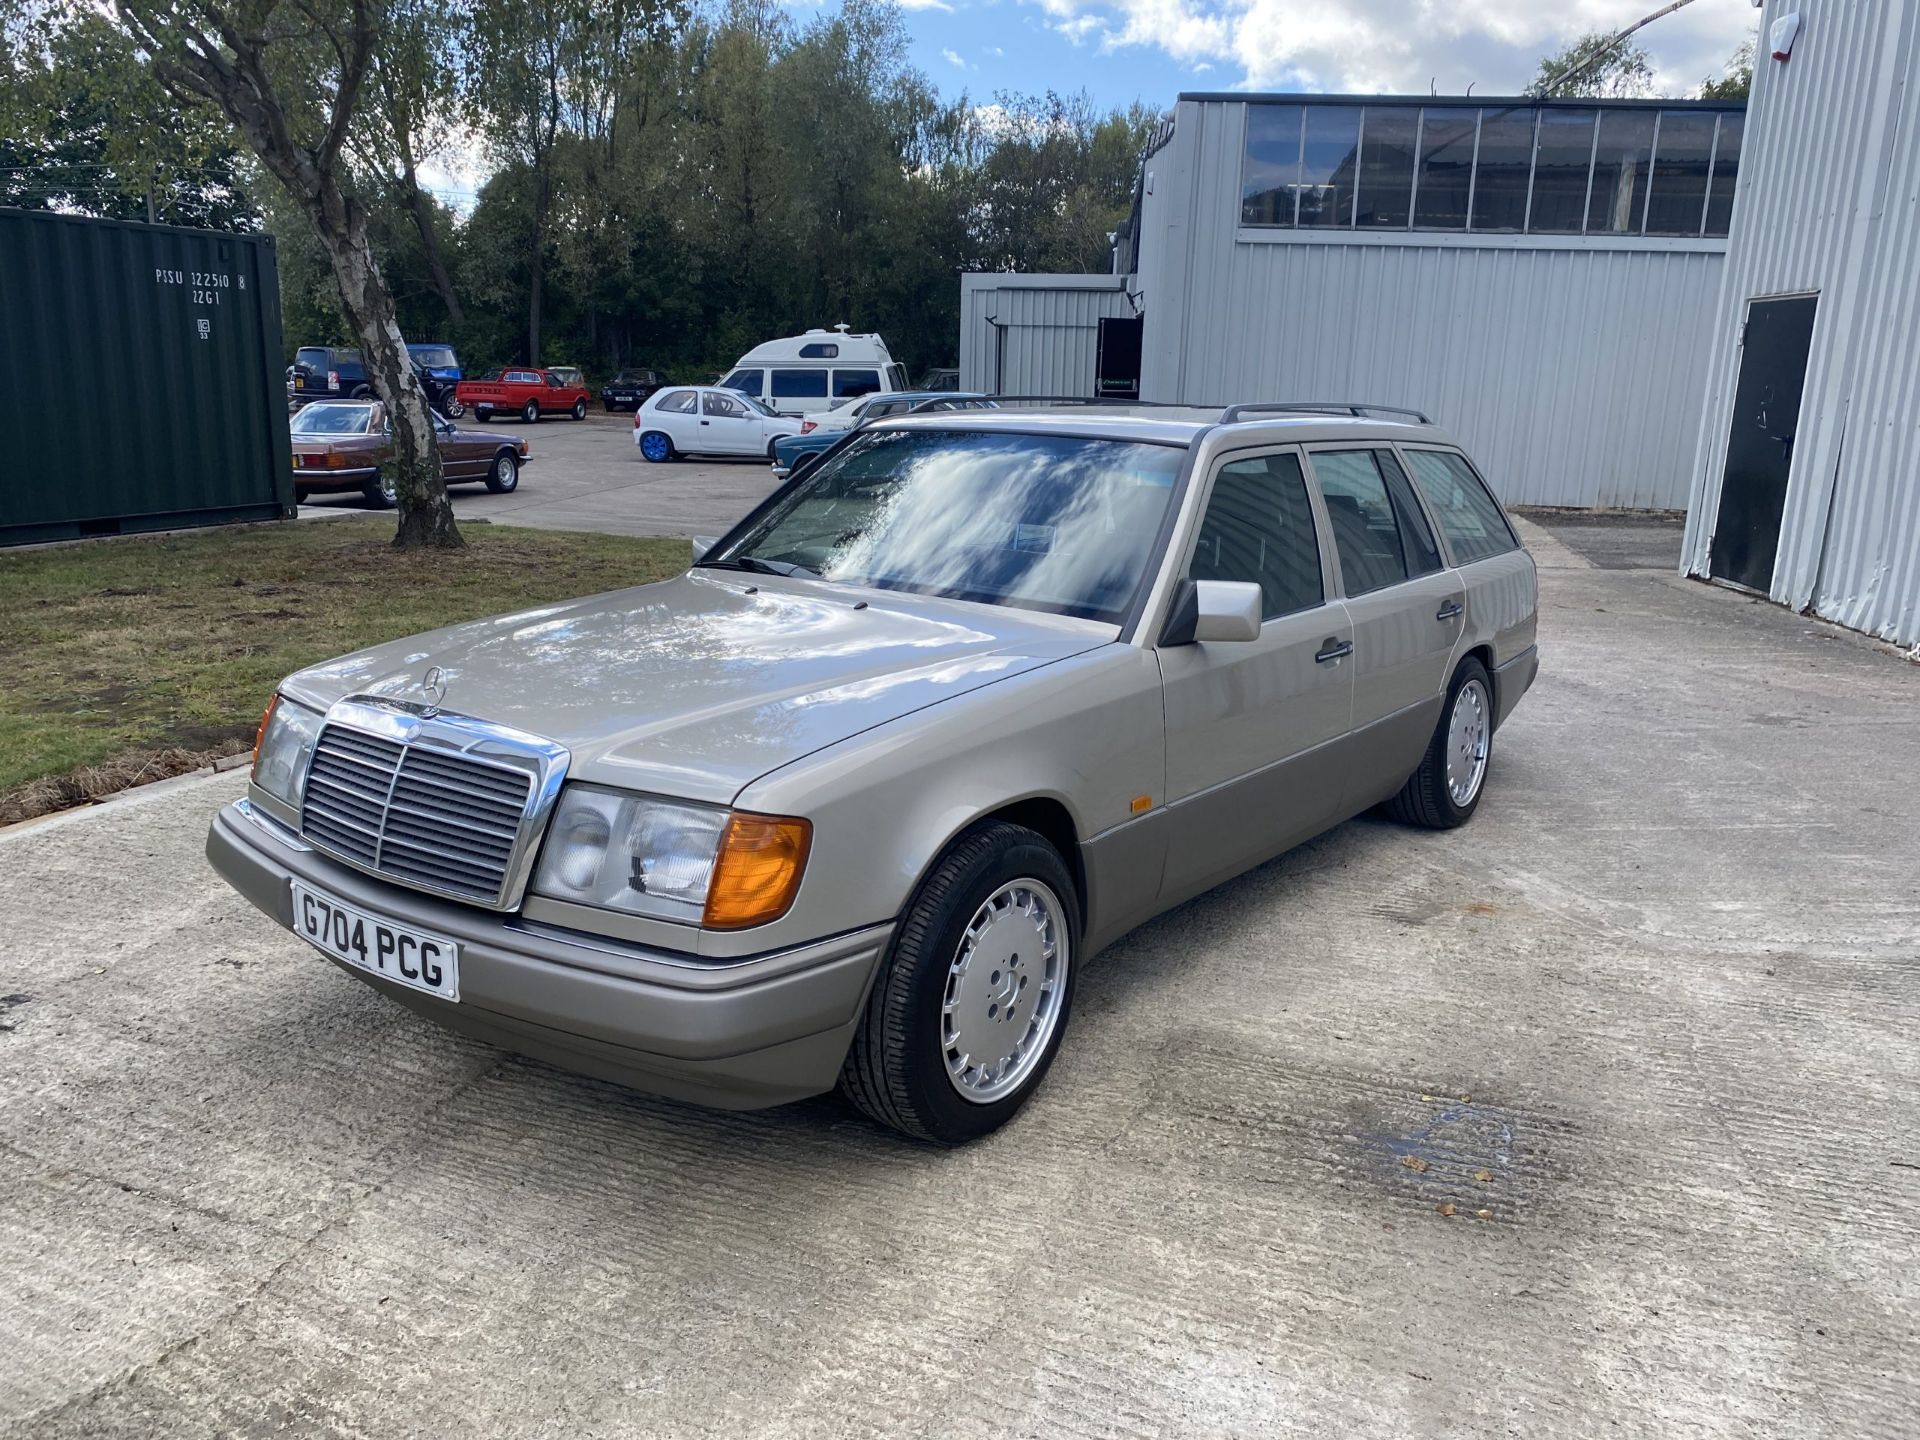 Mercedes 300-24 - Image 16 of 49